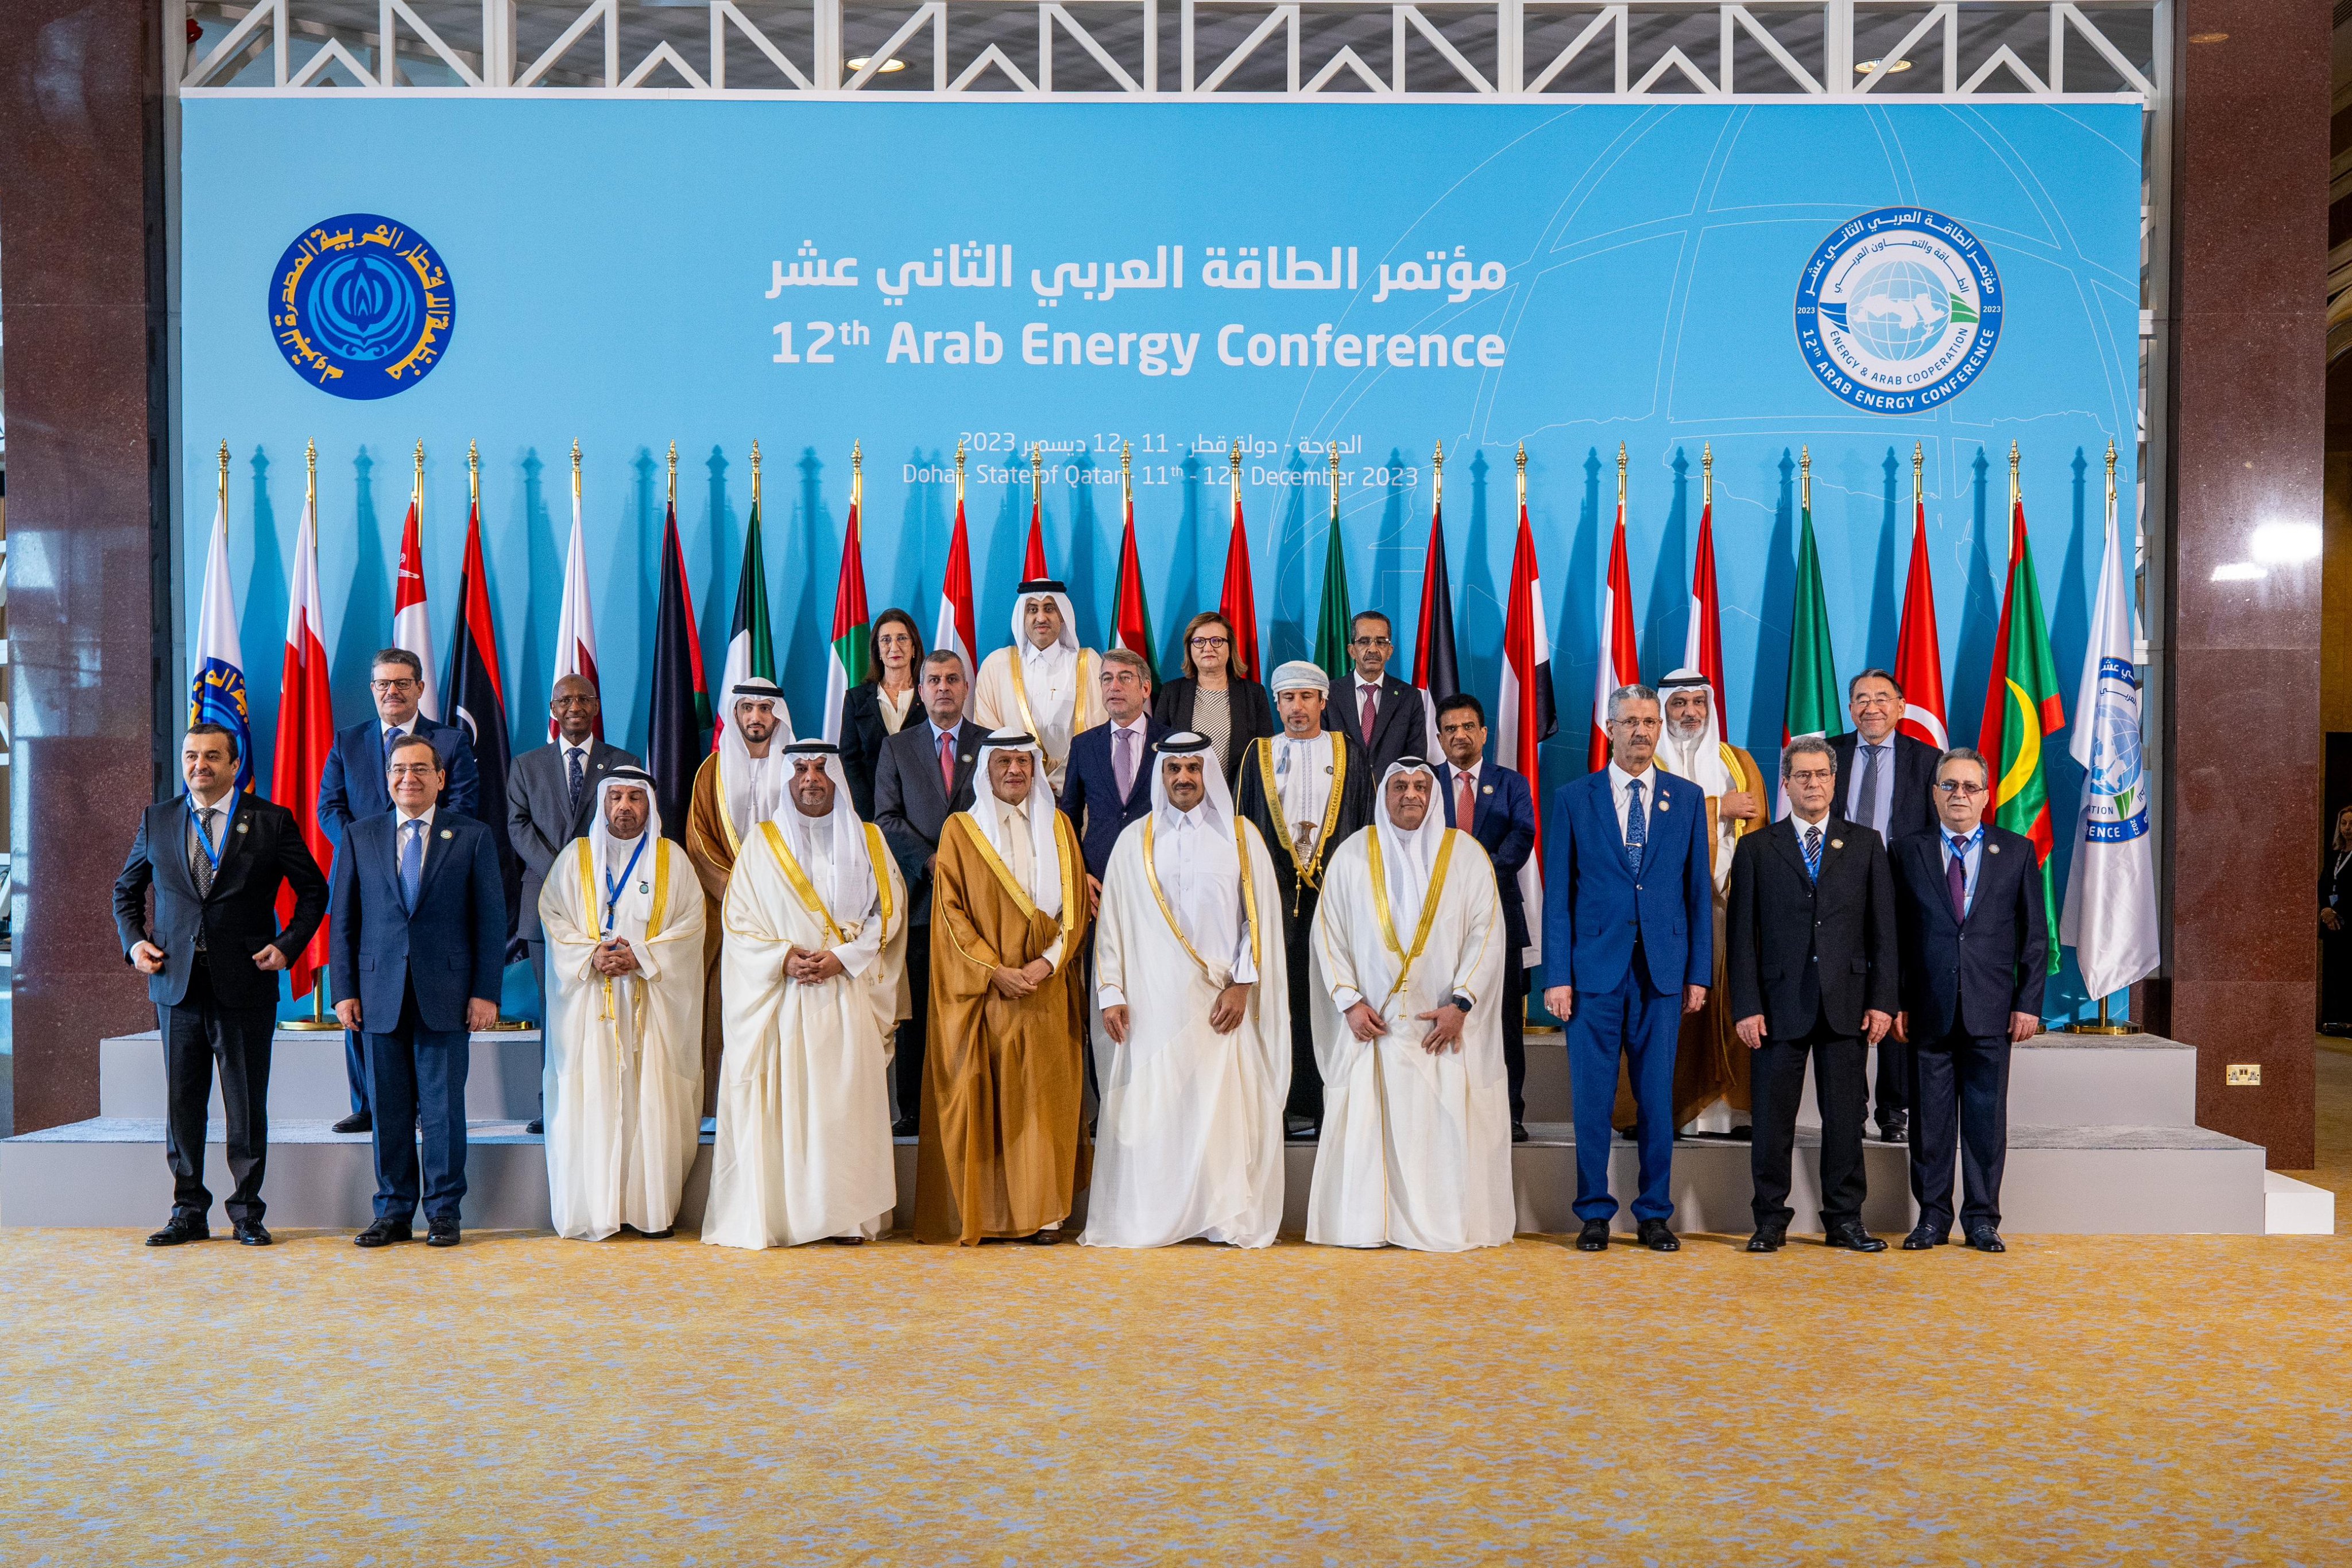 The 12th Arab Energy Conference - OAPEC